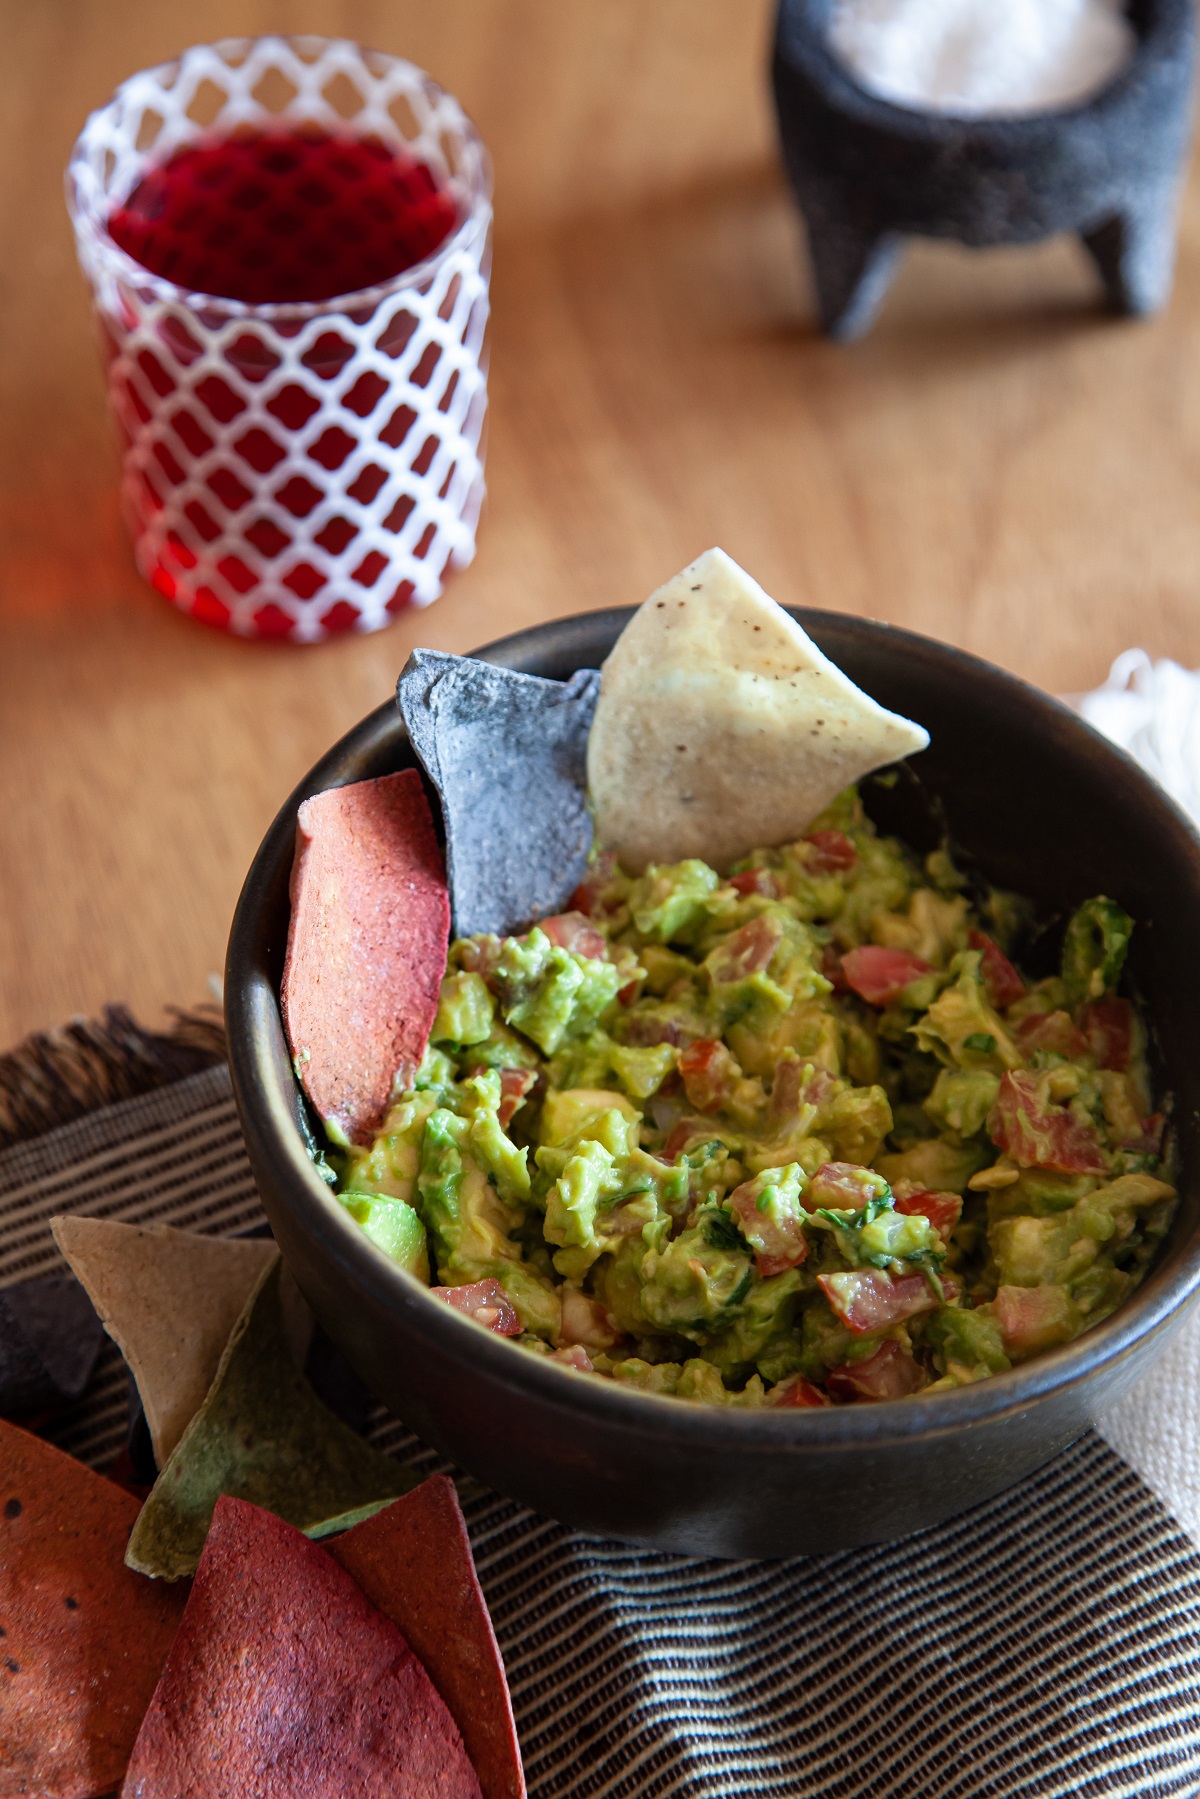 Guacamole and tortilla chips in a black bowl